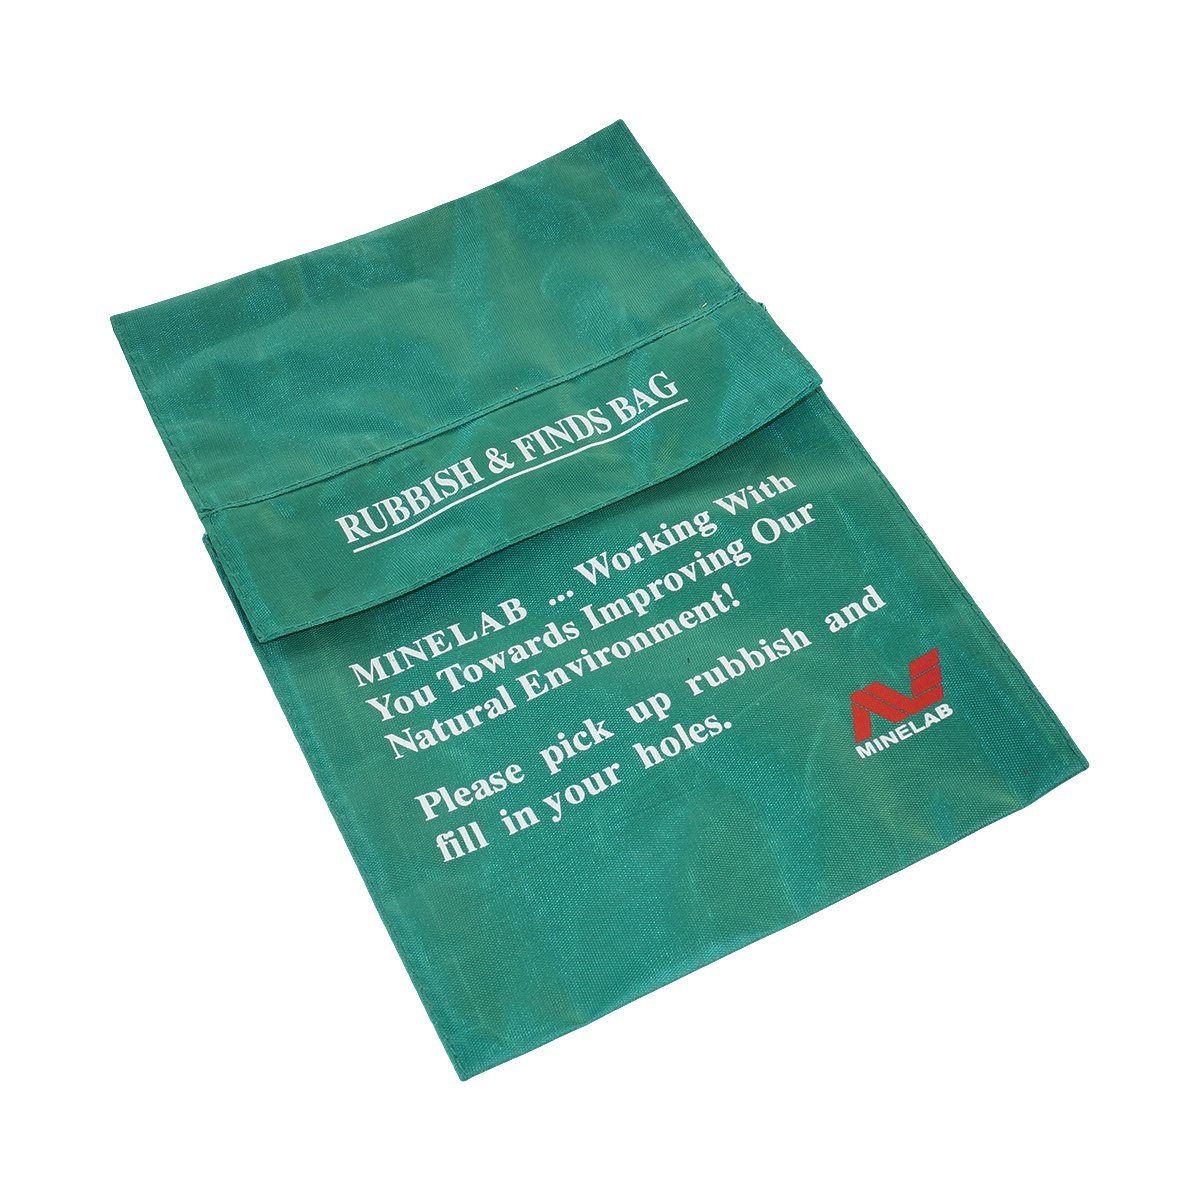 Minelab Rubbish and Finds Bag, 10 Pack